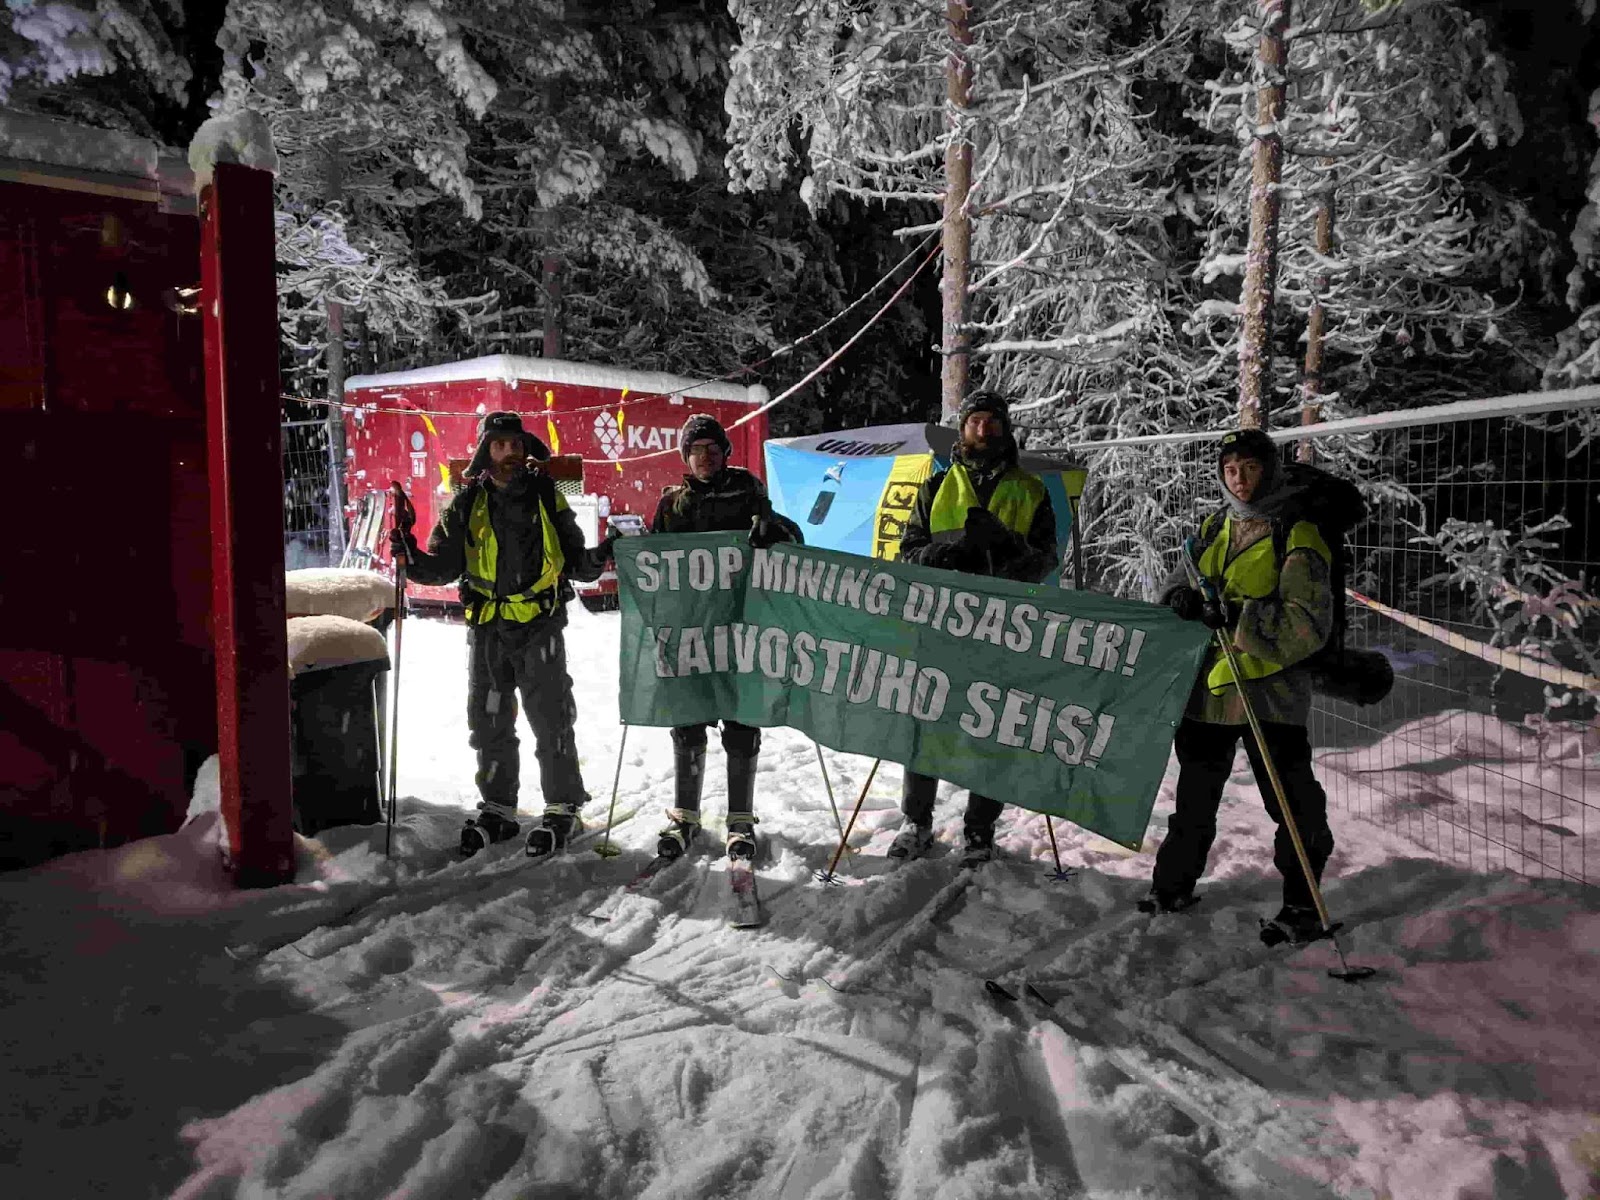 Rebels on skis stand outside a drill site holding a banner that says 'stop mining disaster!'